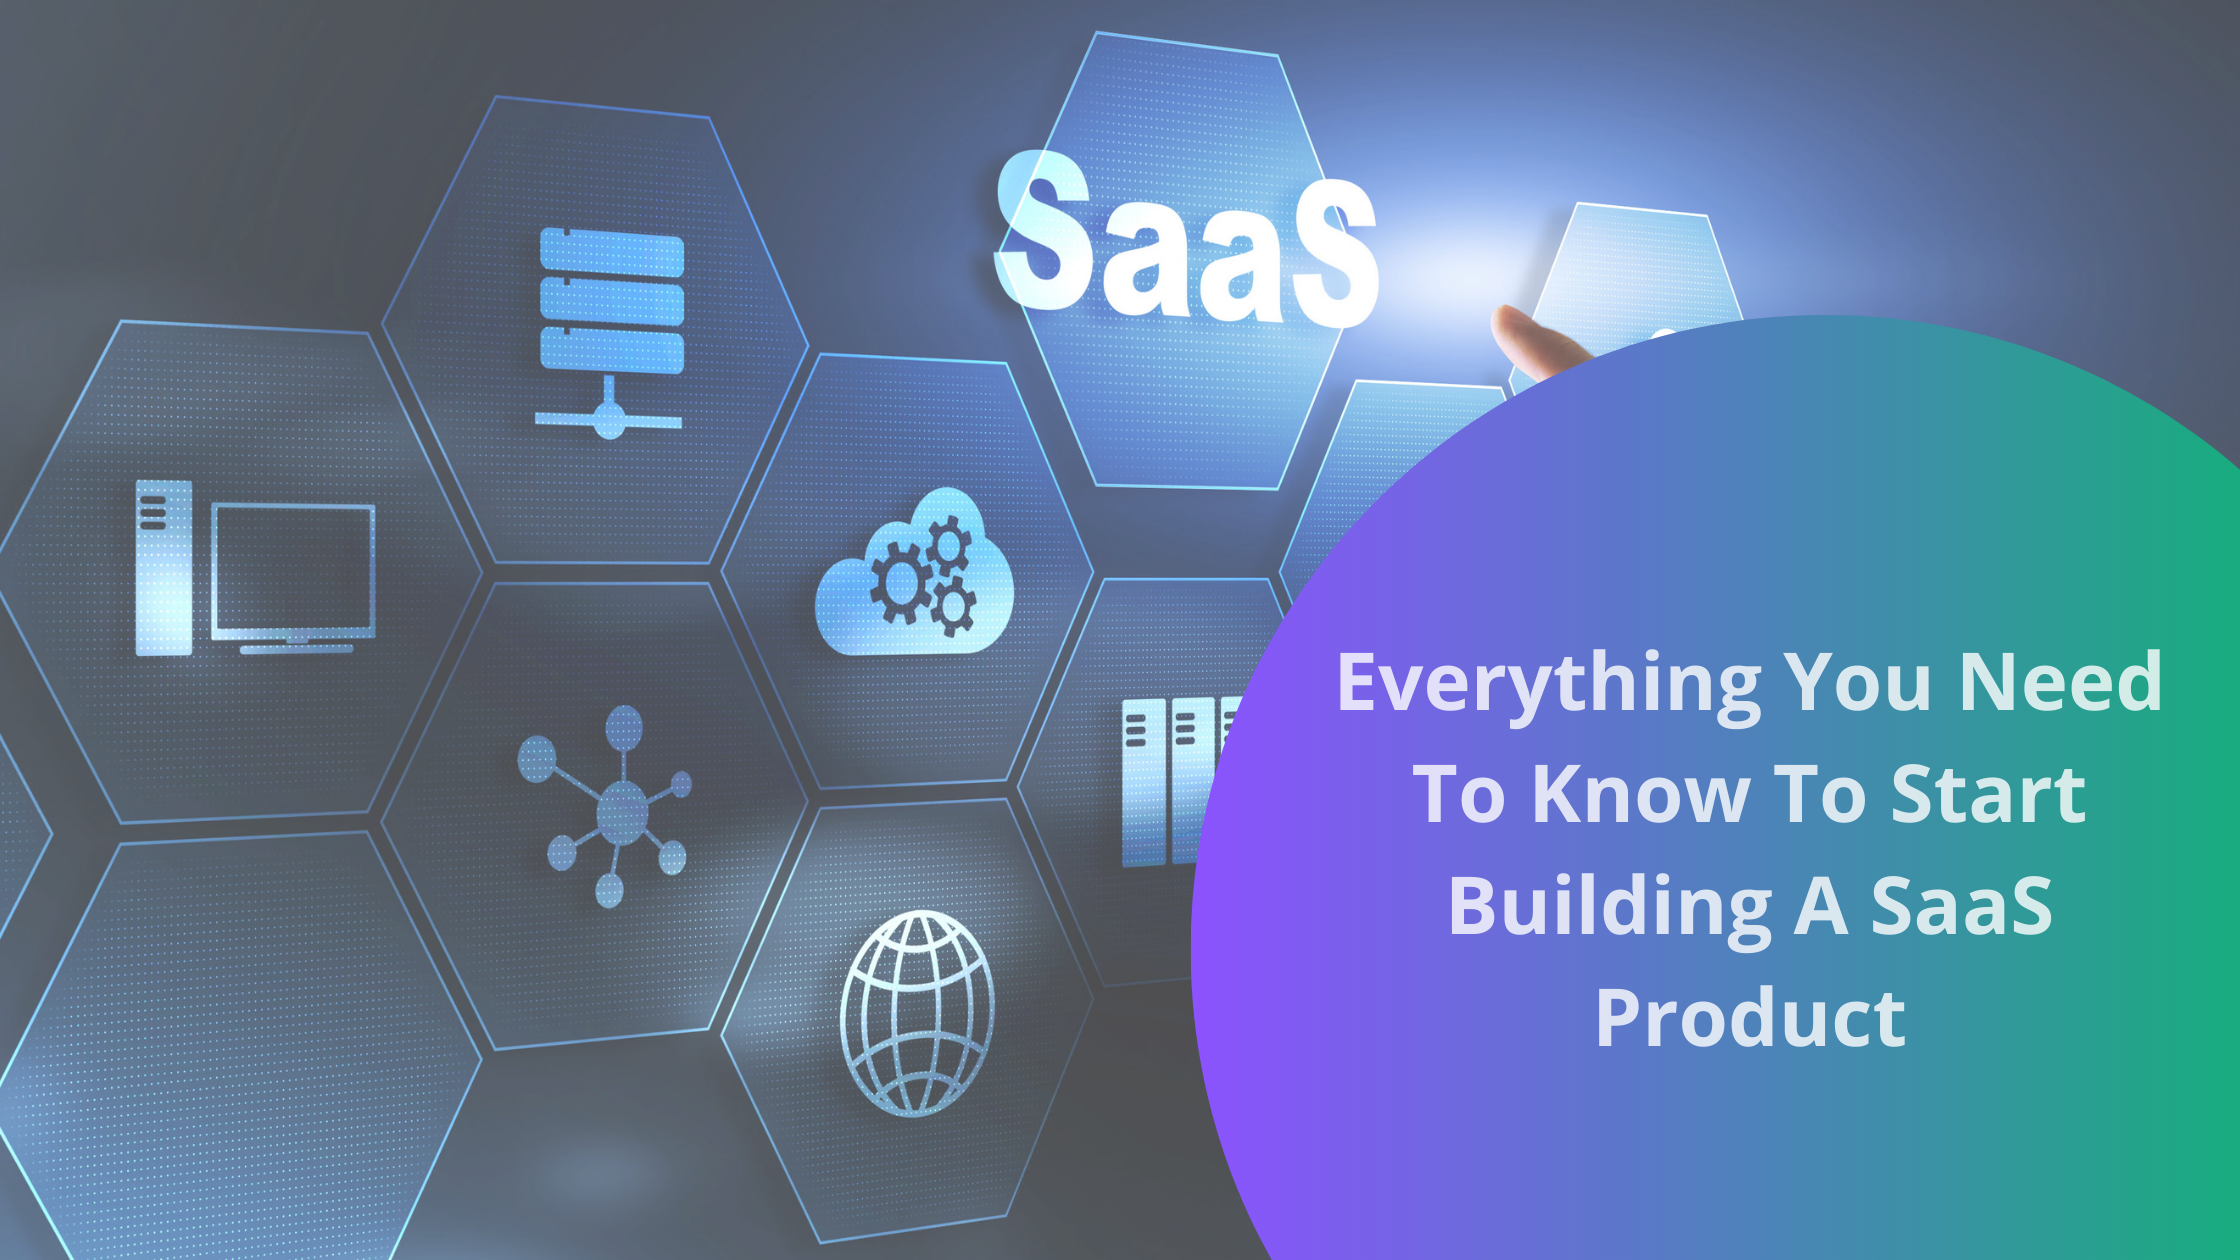 Have a saas product idea? Everything you need to know to start building it | bookafy